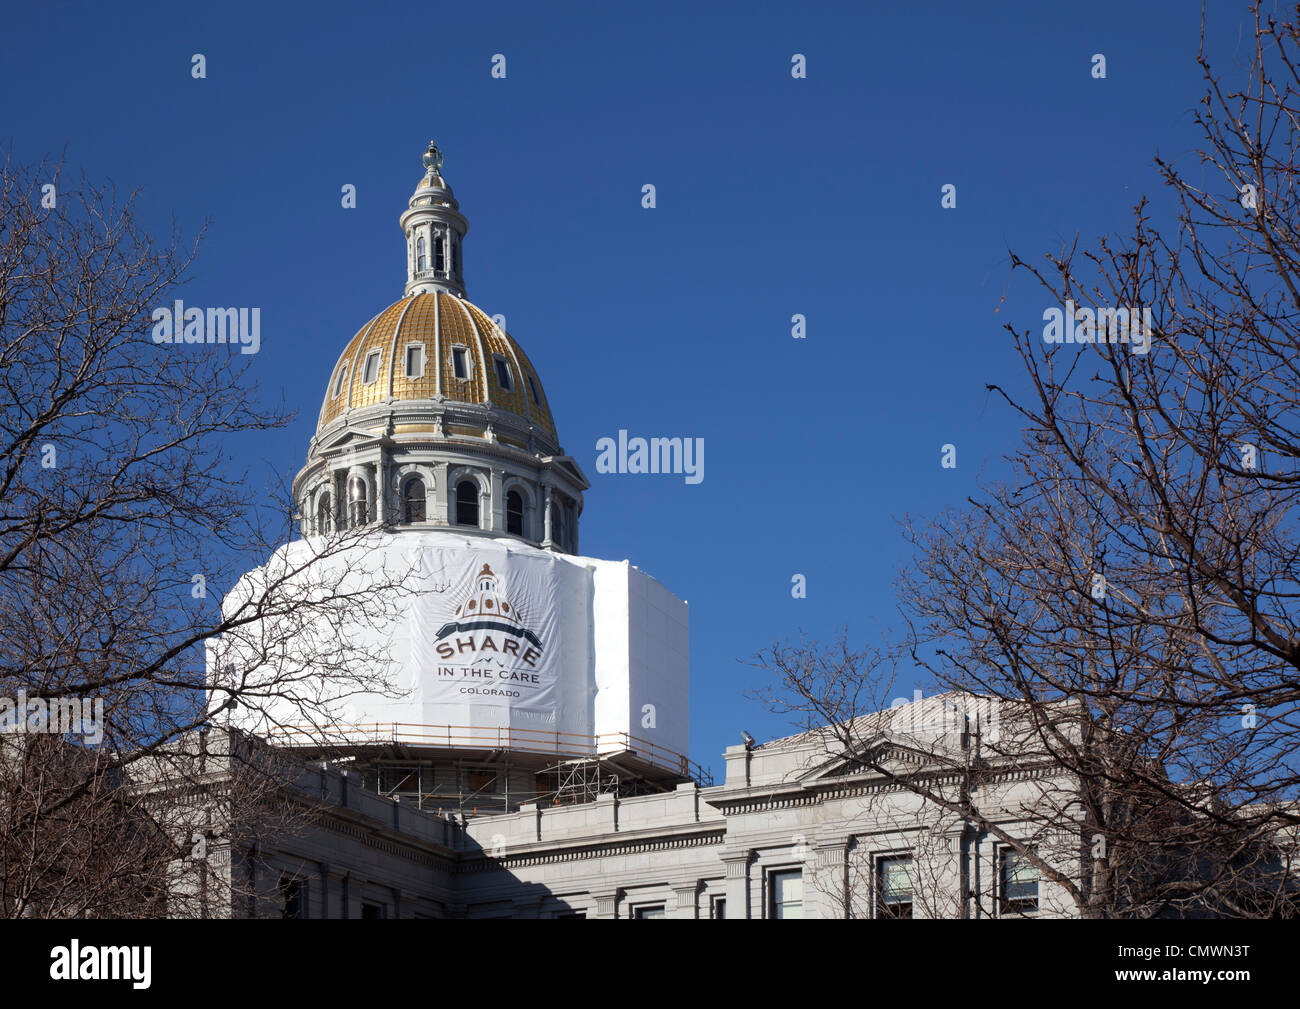 The Colorado capitol building. The dome is undergoing restoration. Stock Photo